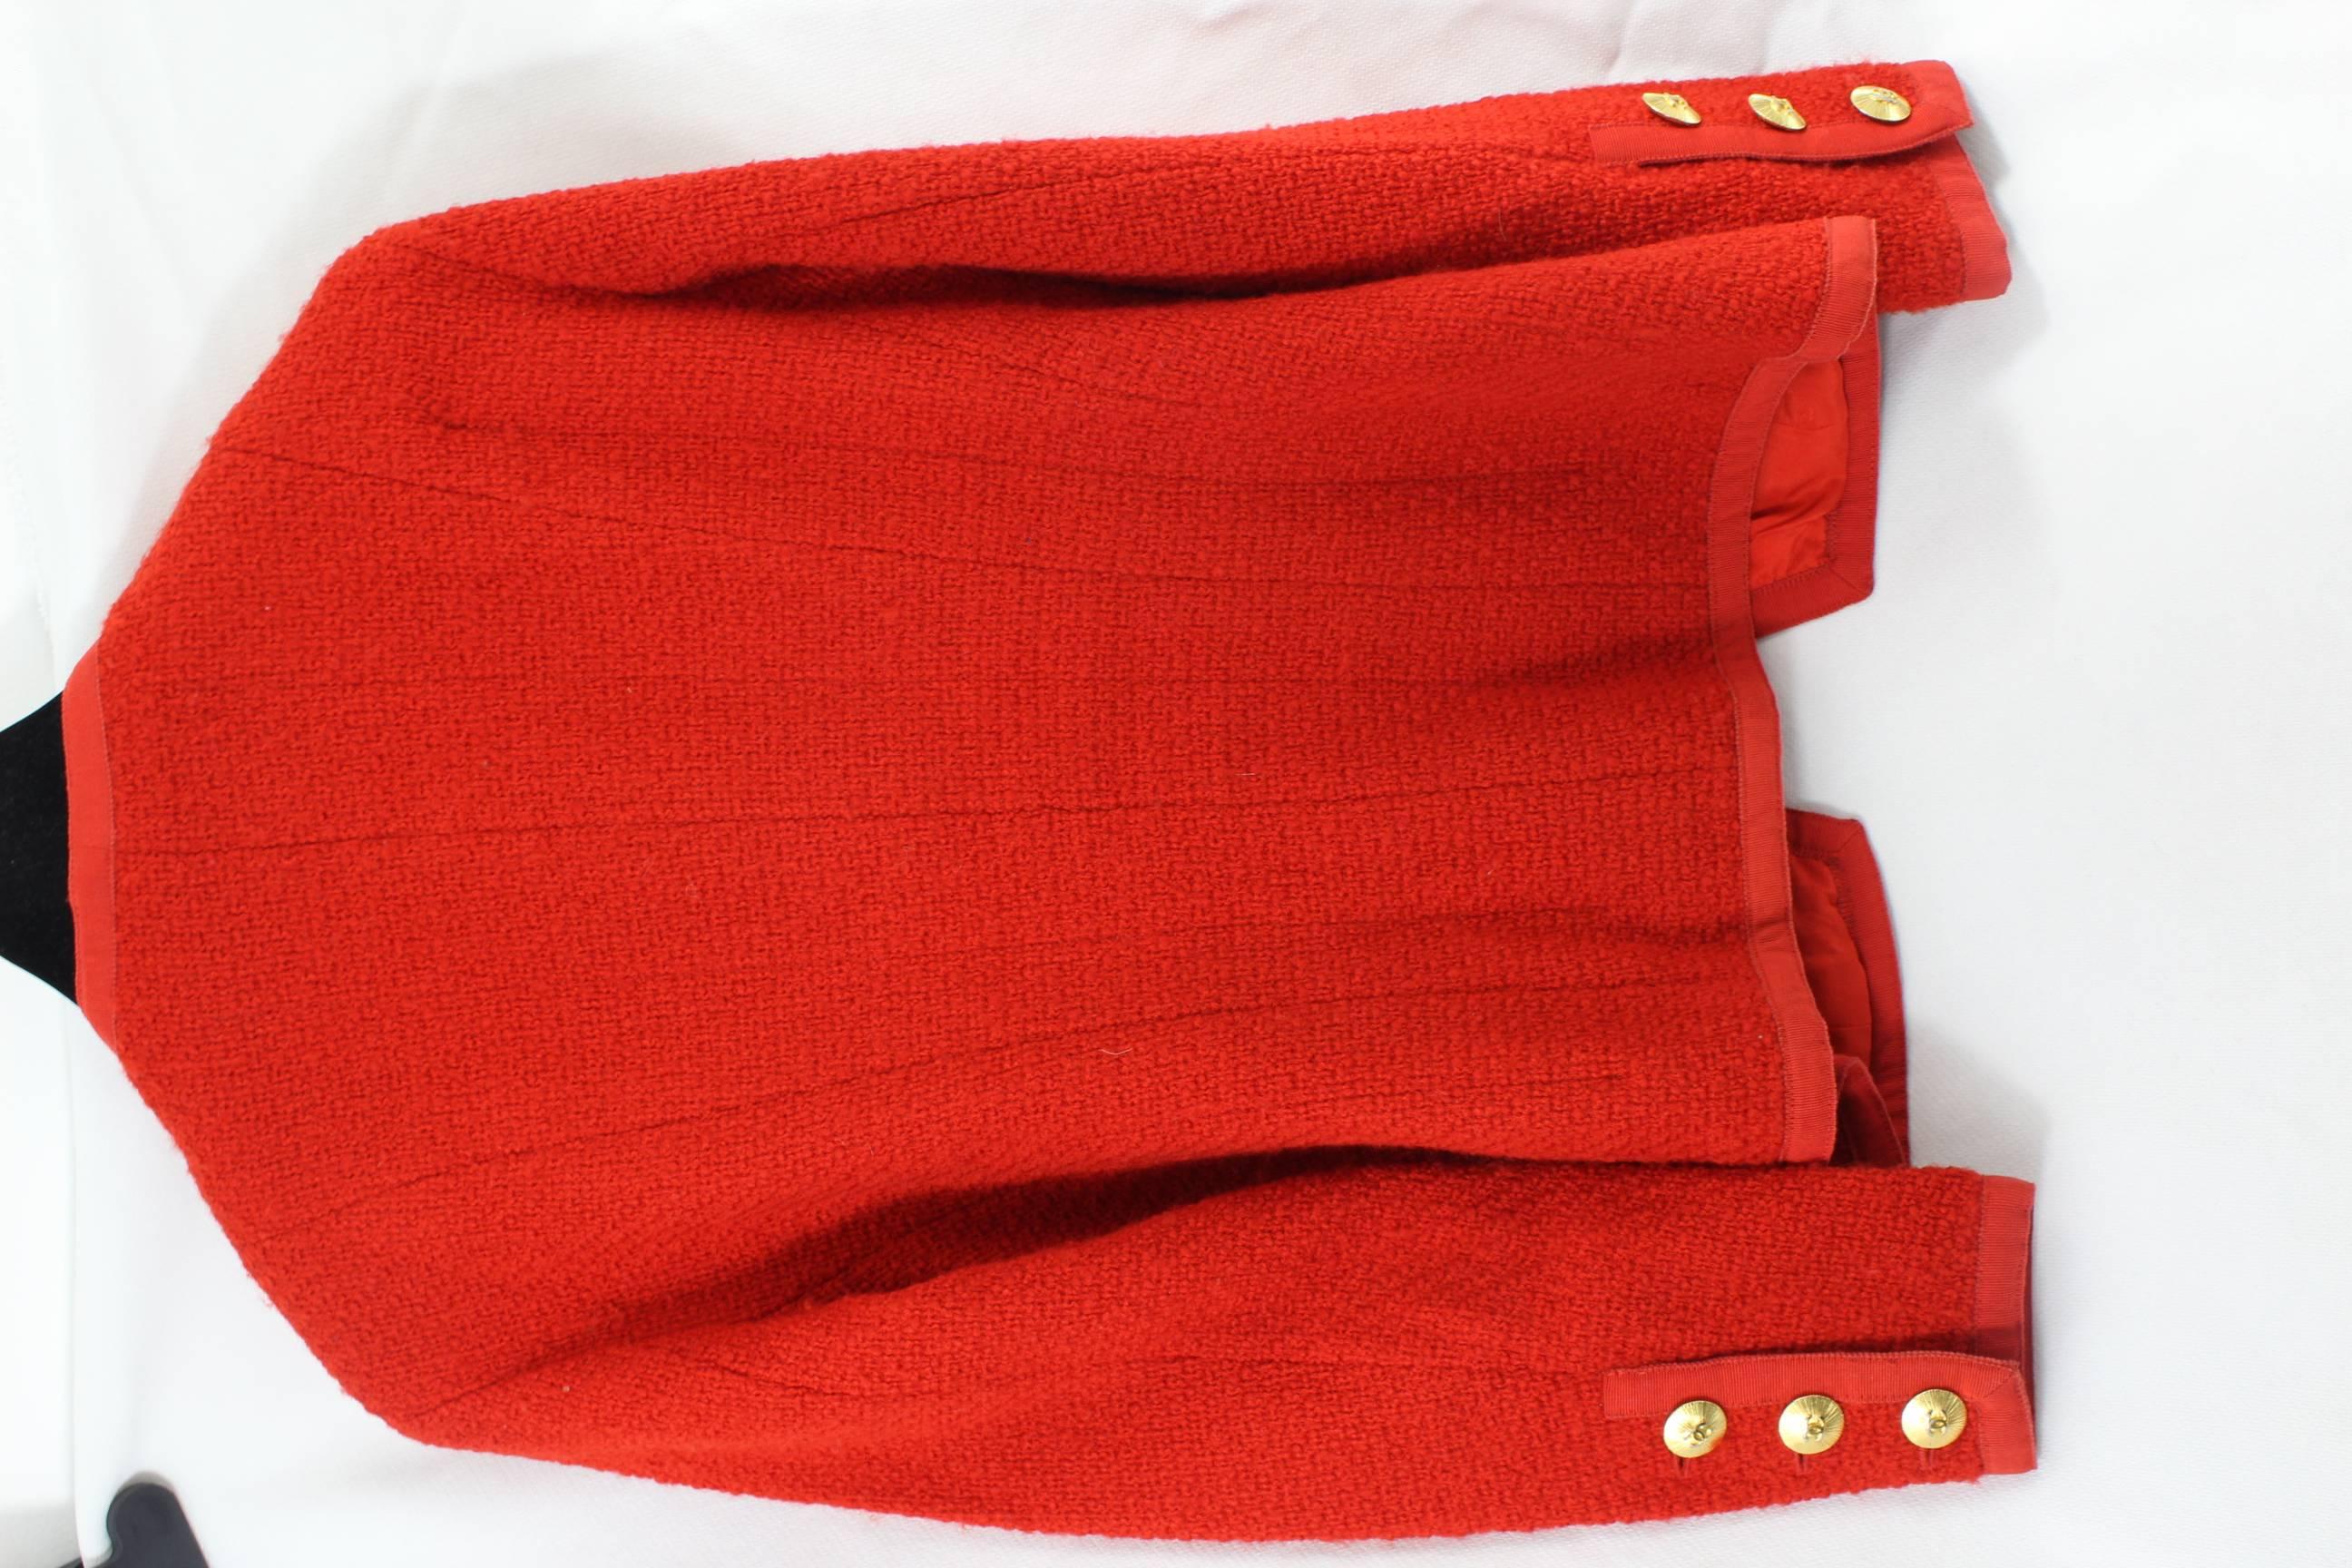 Vintage Short Chanel Jacket in Red Tweed with Golden Buttons. Size 38 F 3